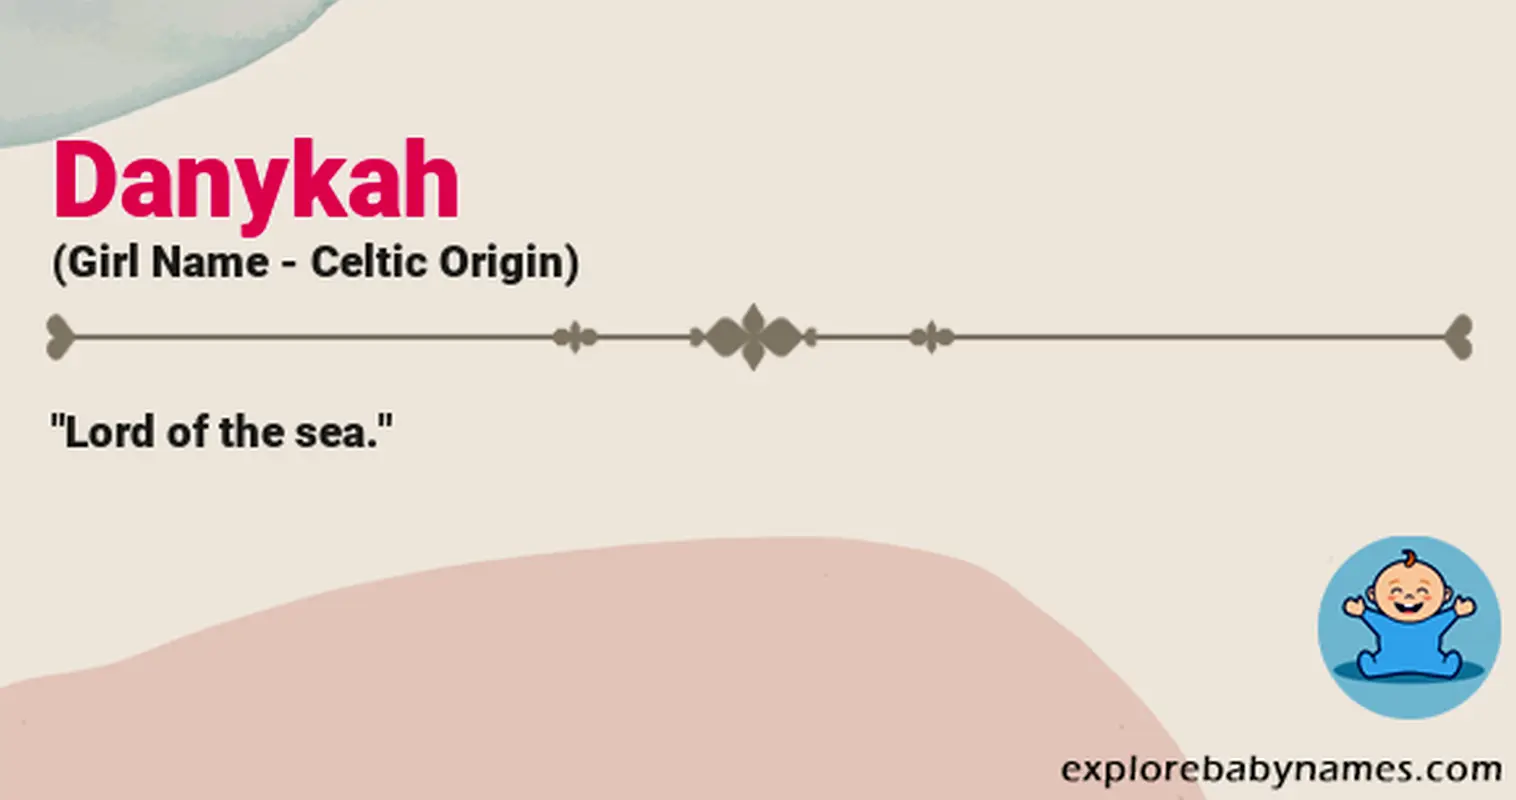 Meaning of Danykah